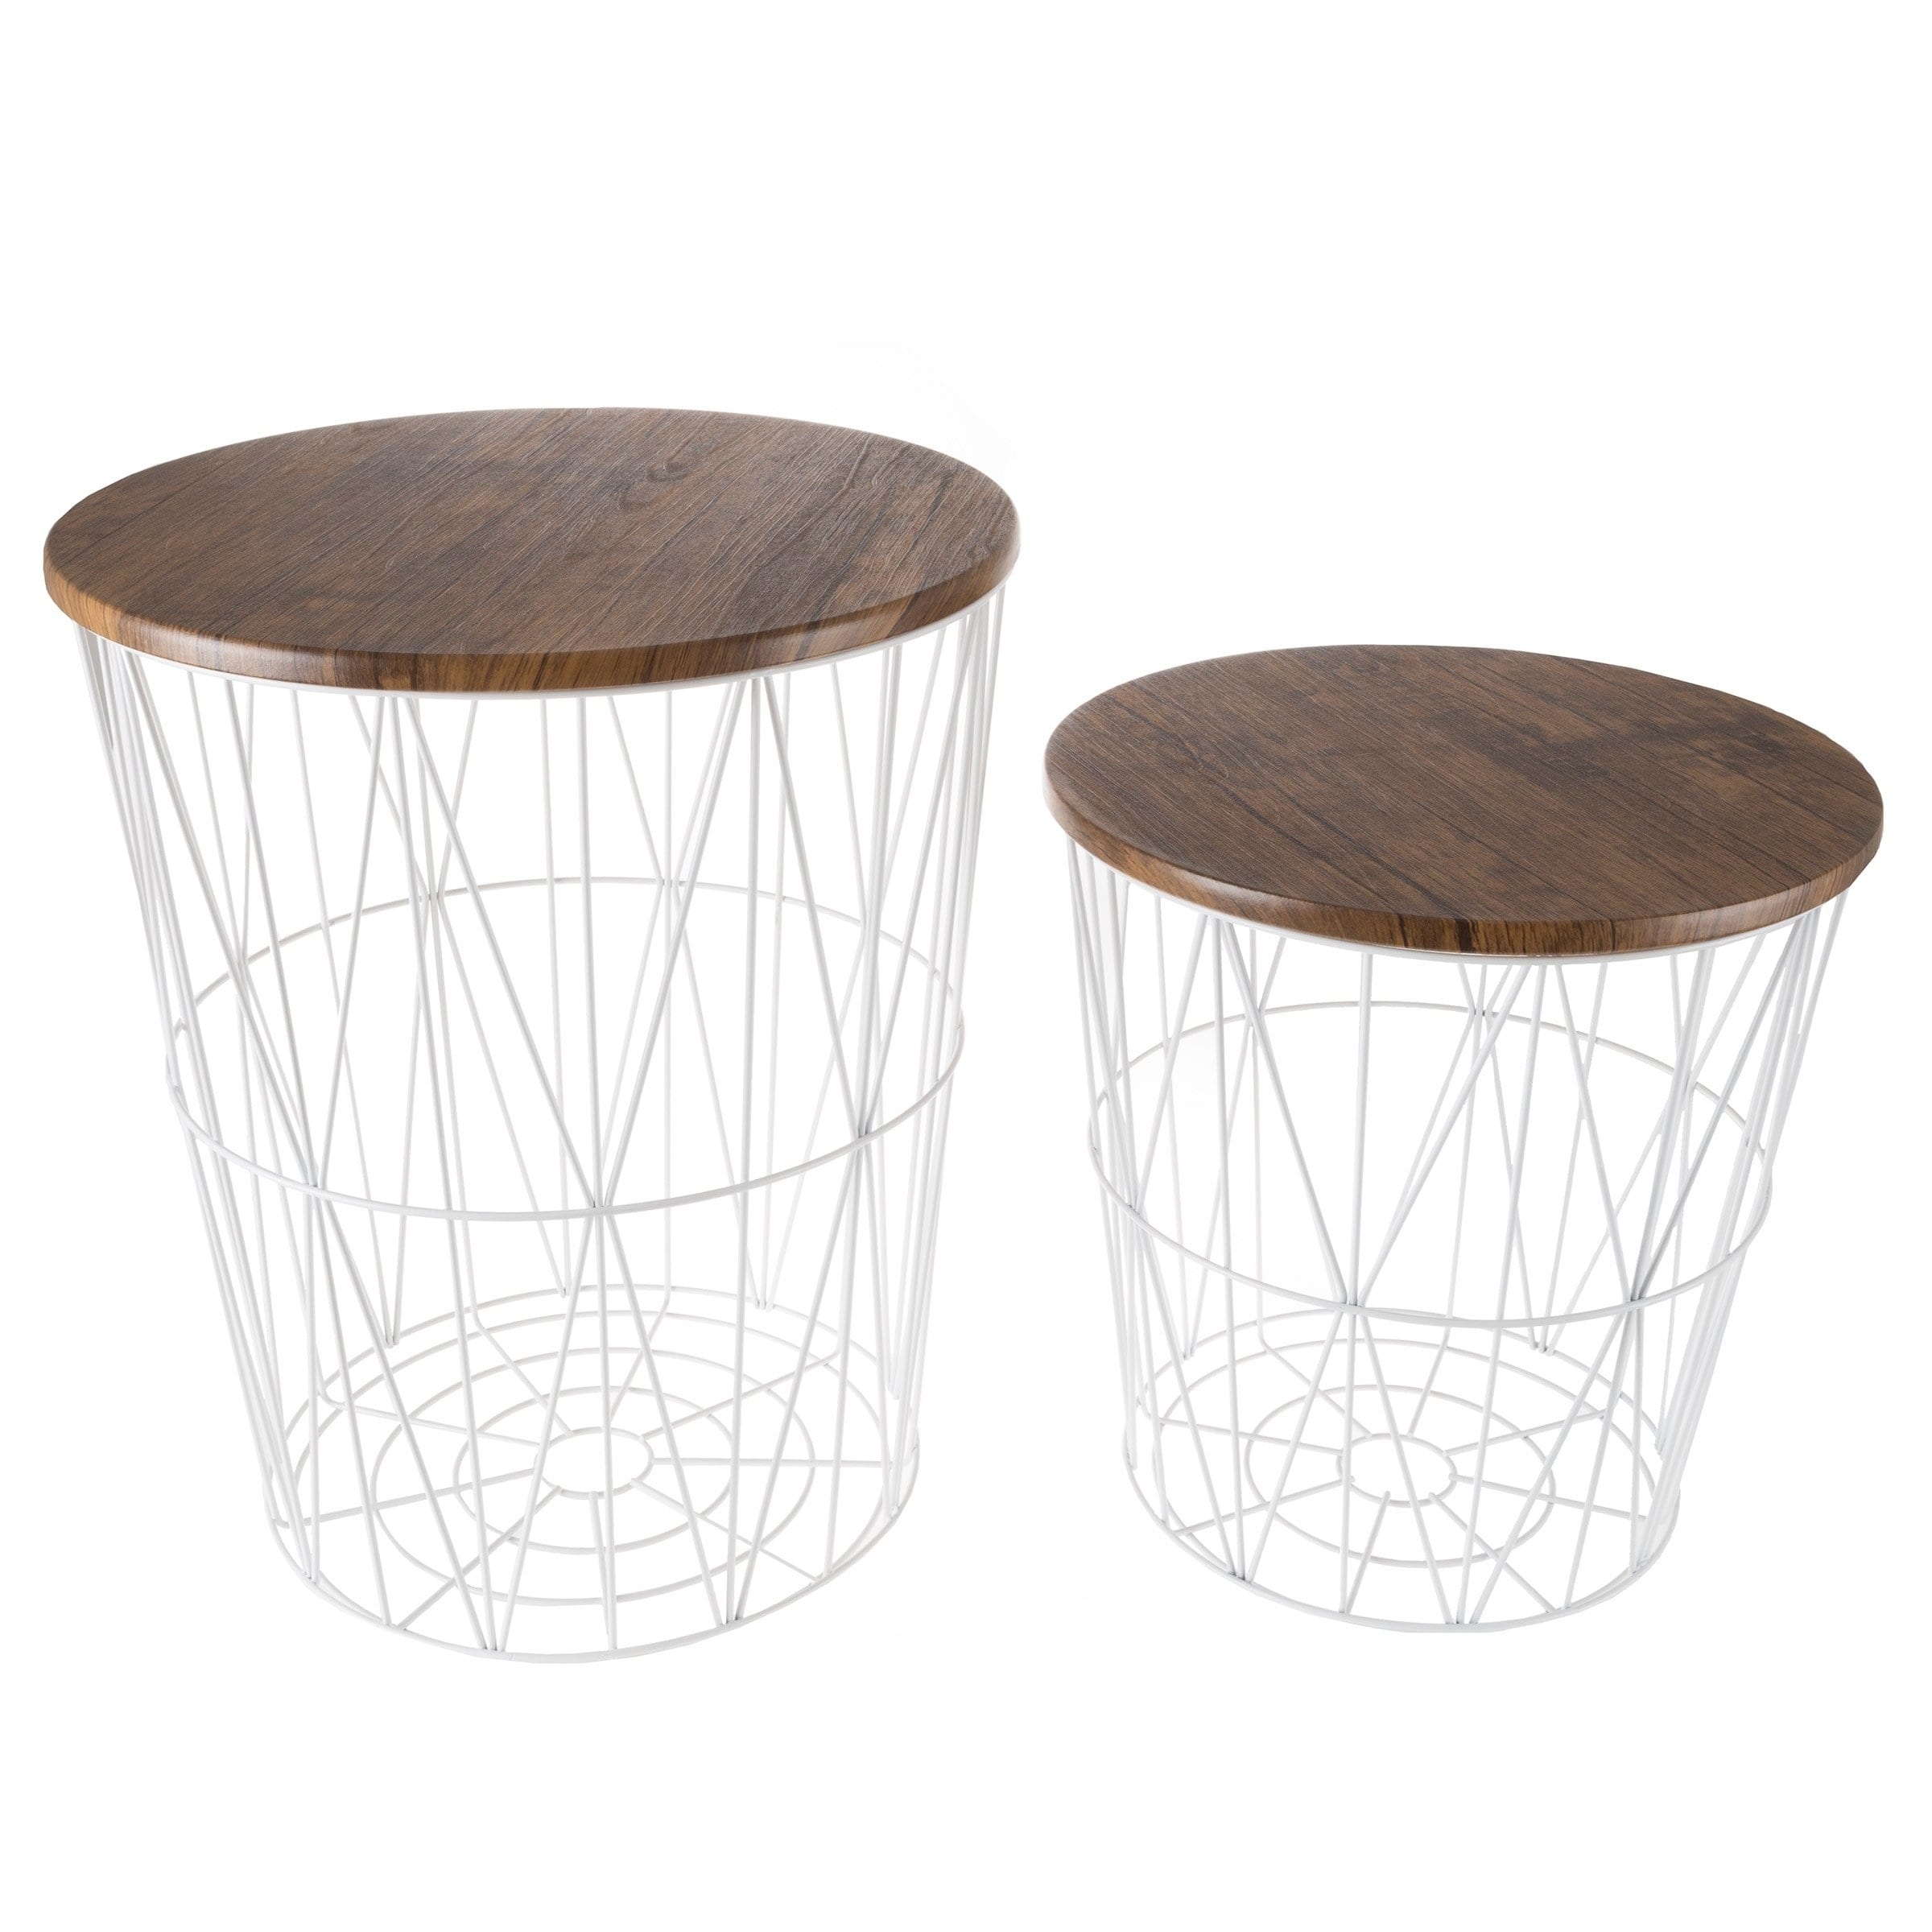 nesting end tables with storage set convertible round metal basket veneer wood top accent side lavish home table ceramic lift coffee ikea rod iron patio furniture small rustic